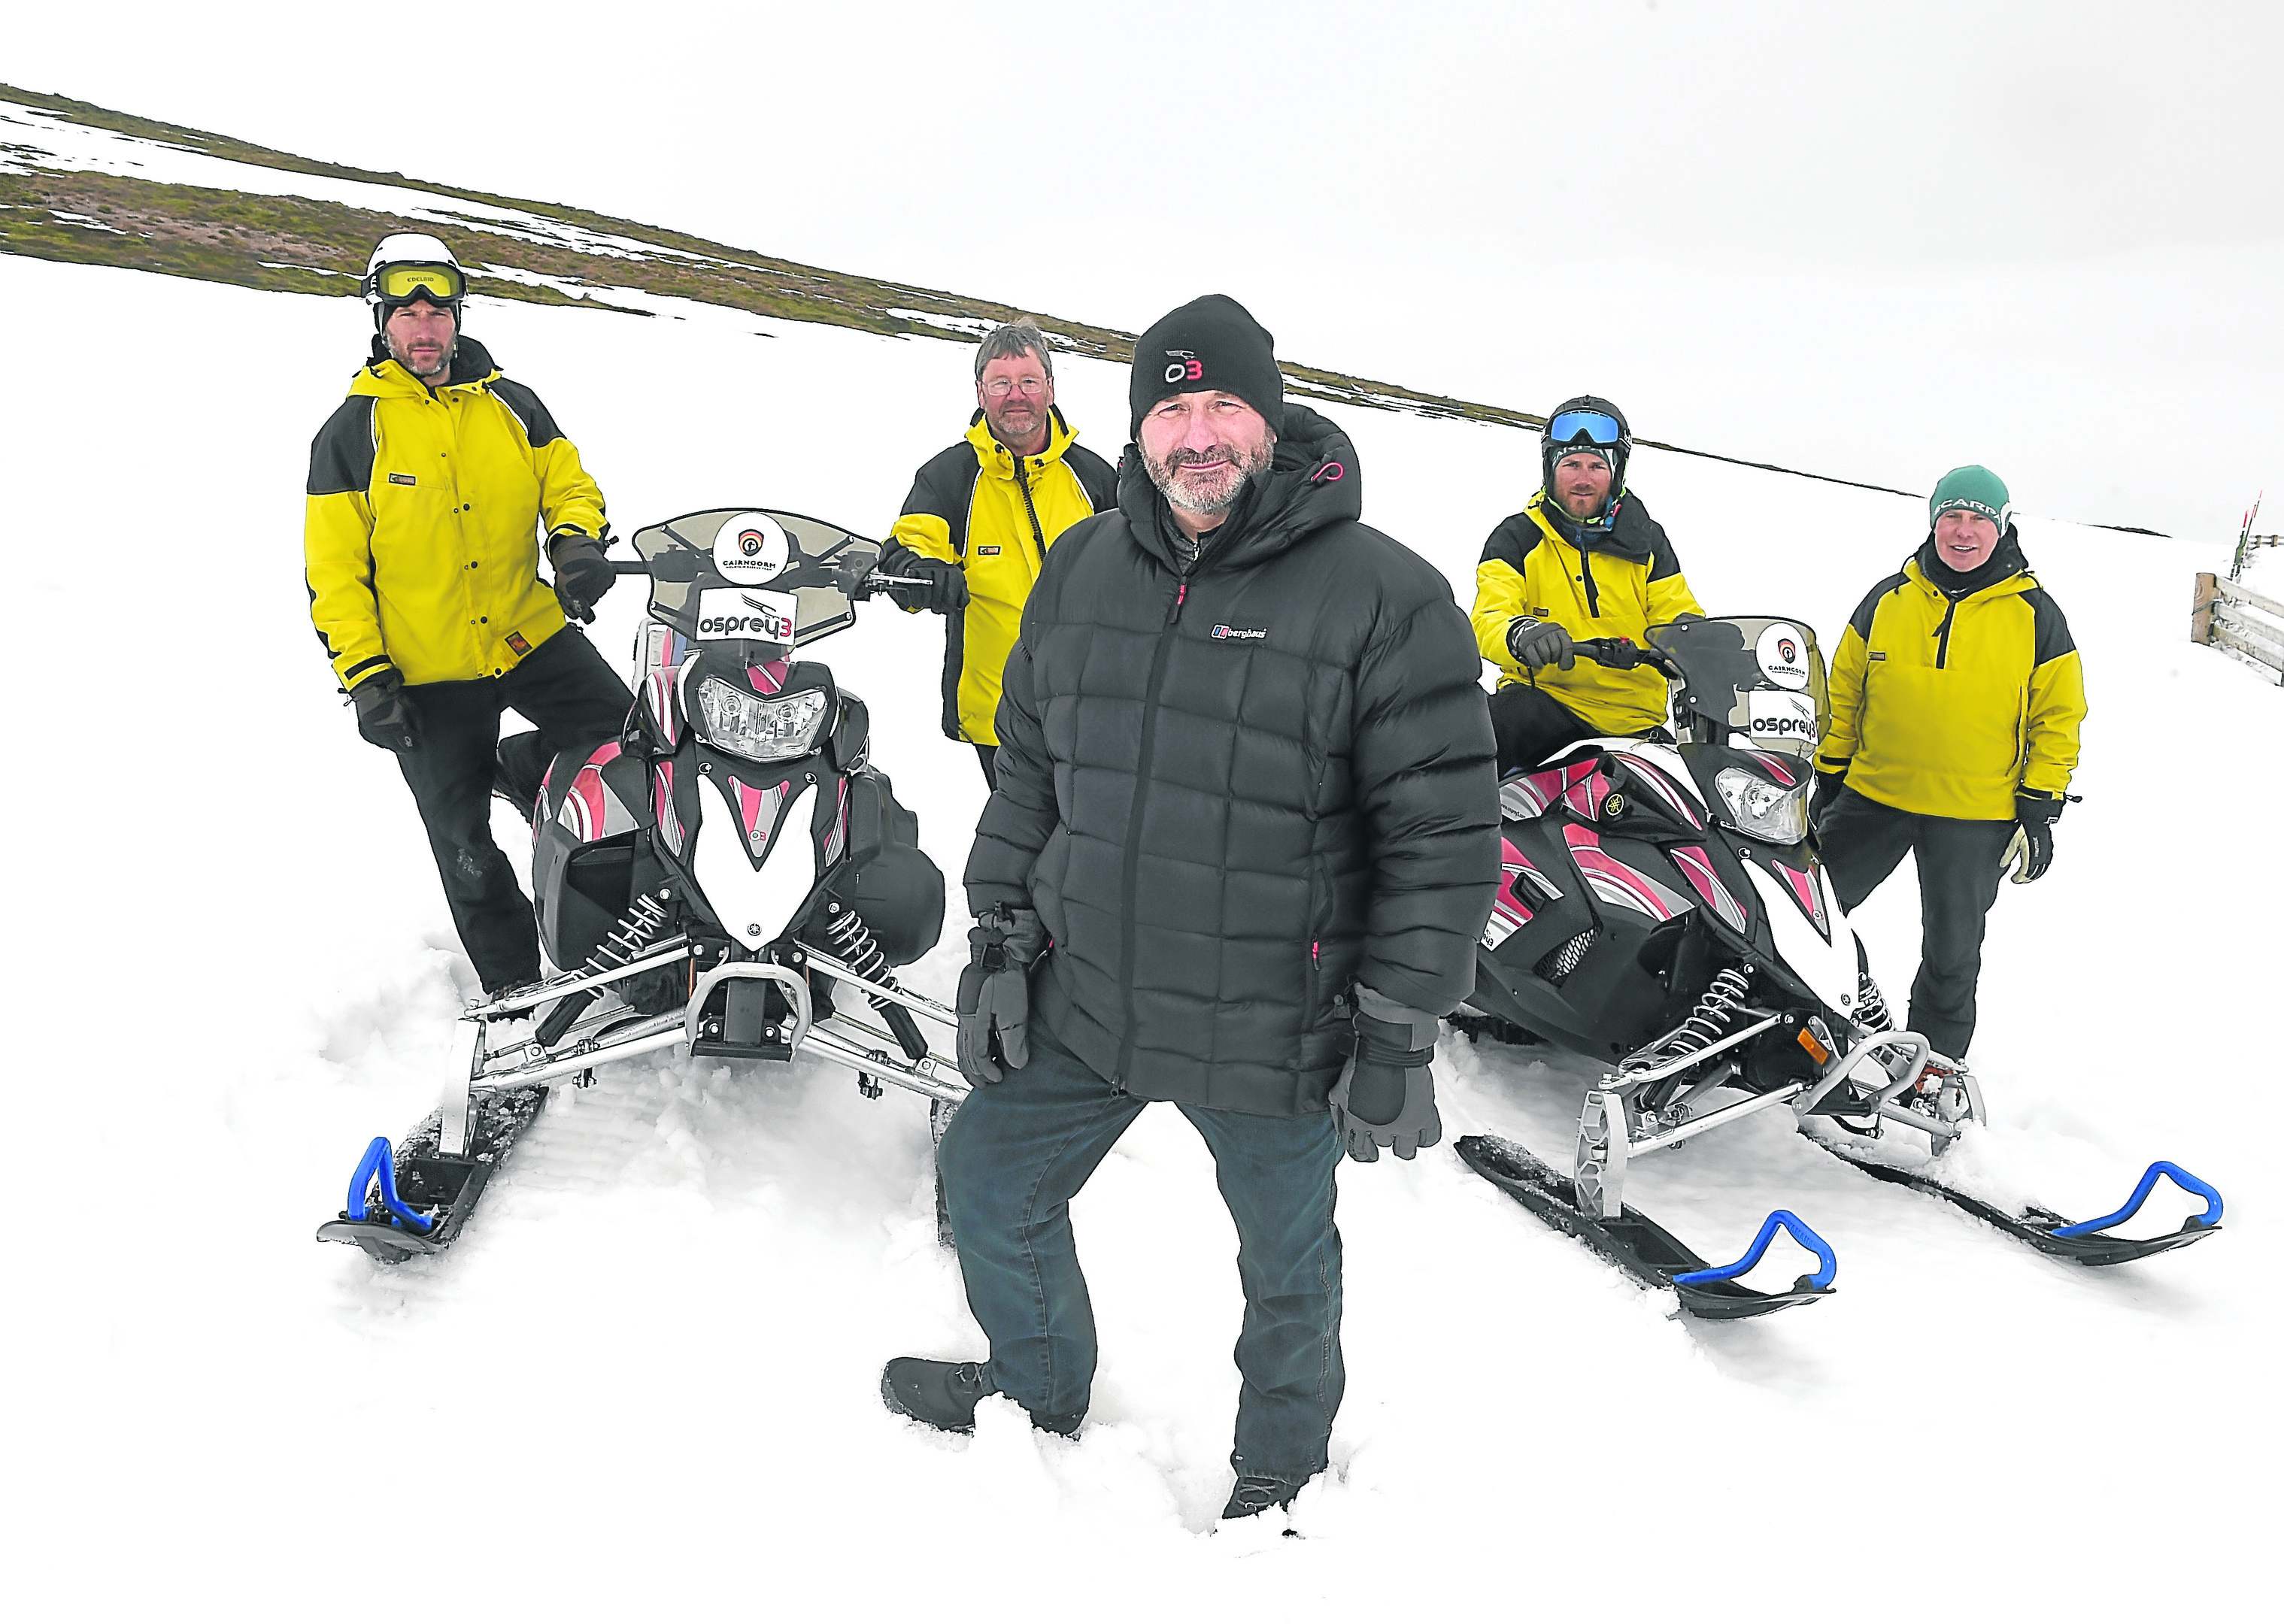 The Cairngorm Mountain Rescue Team have been presented with two new snow scooters by Andy Clark and Laura Hepburn of Kintore based oil and gas filtration company, Osprey3 on Cairngorm on Friday.  Andy Clark in the foreground with team members Brian Fishpool, Willie Anderson, Iain Cornfoot and Willie Ross.